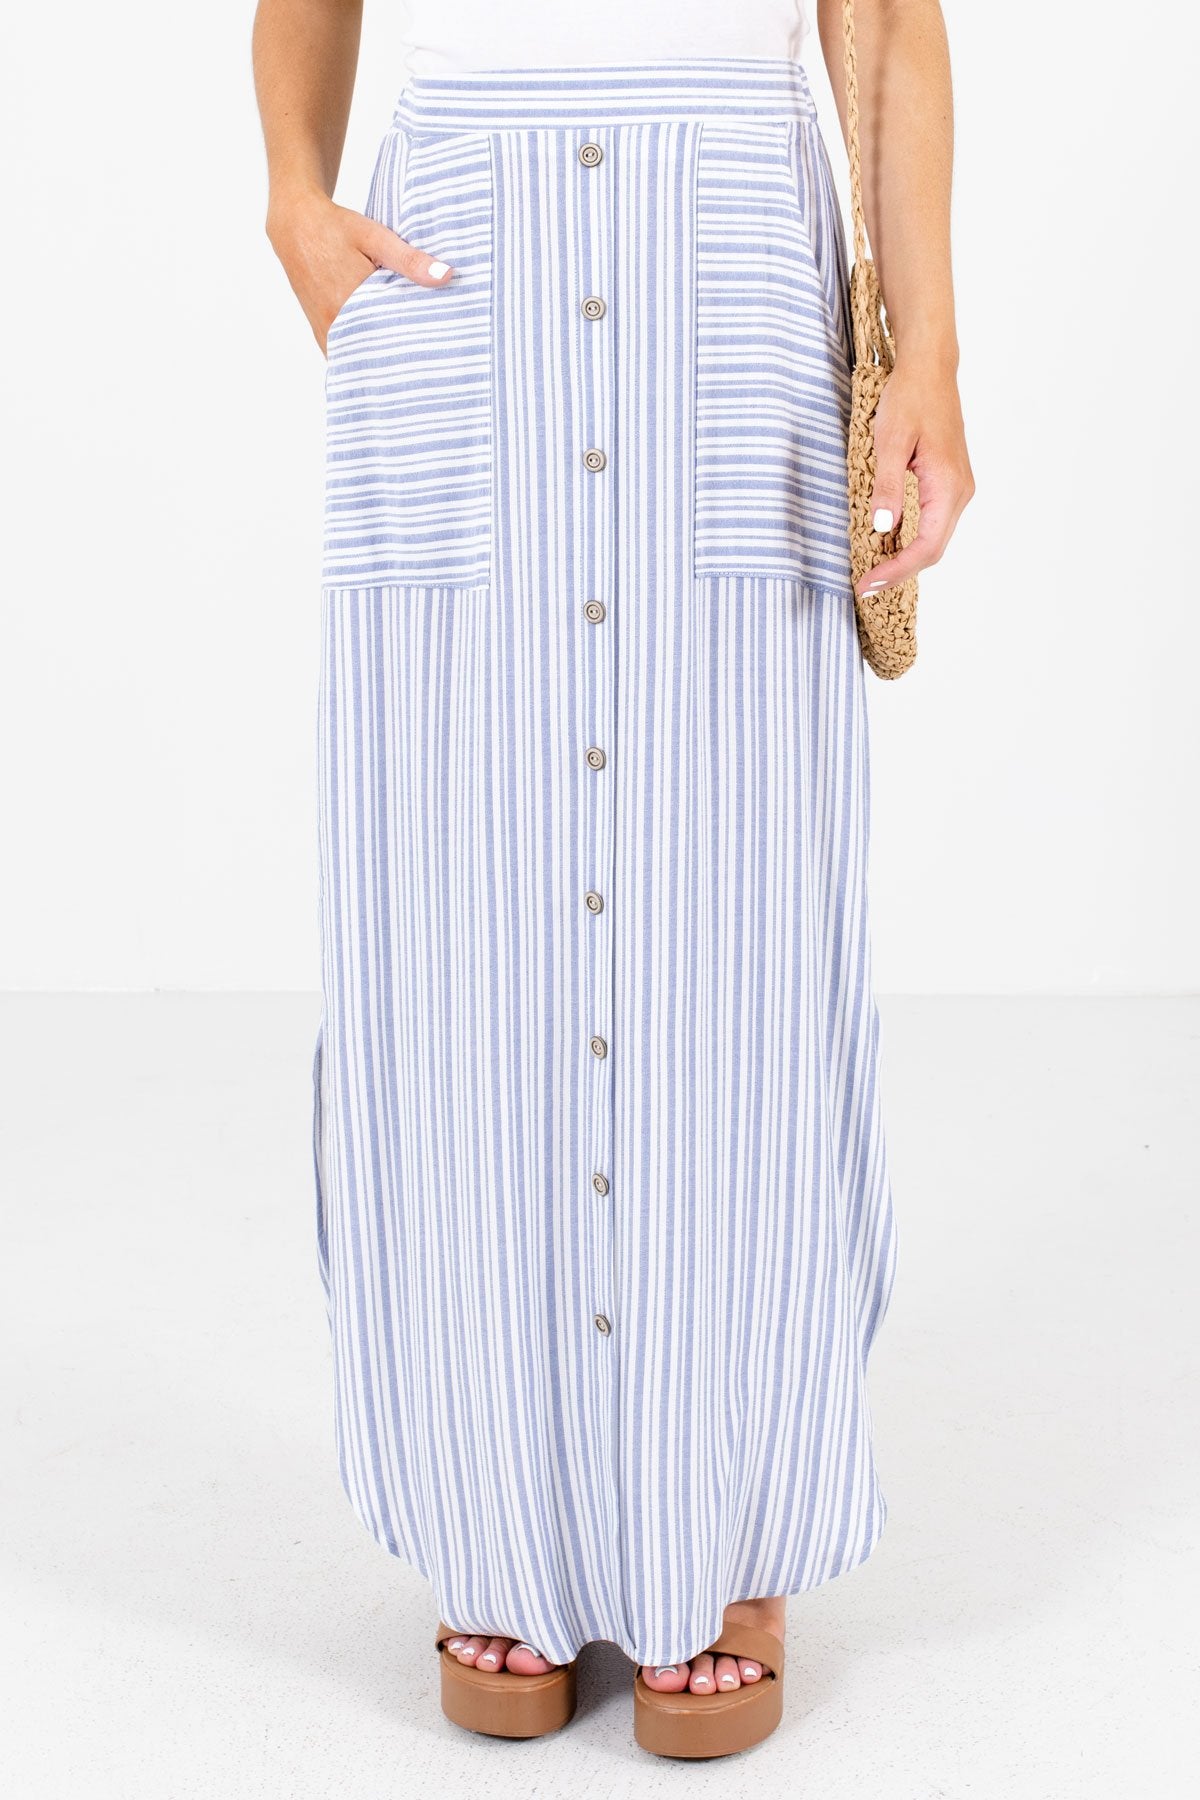 Blue and White Striped Boutique Maxi Skirts for Women